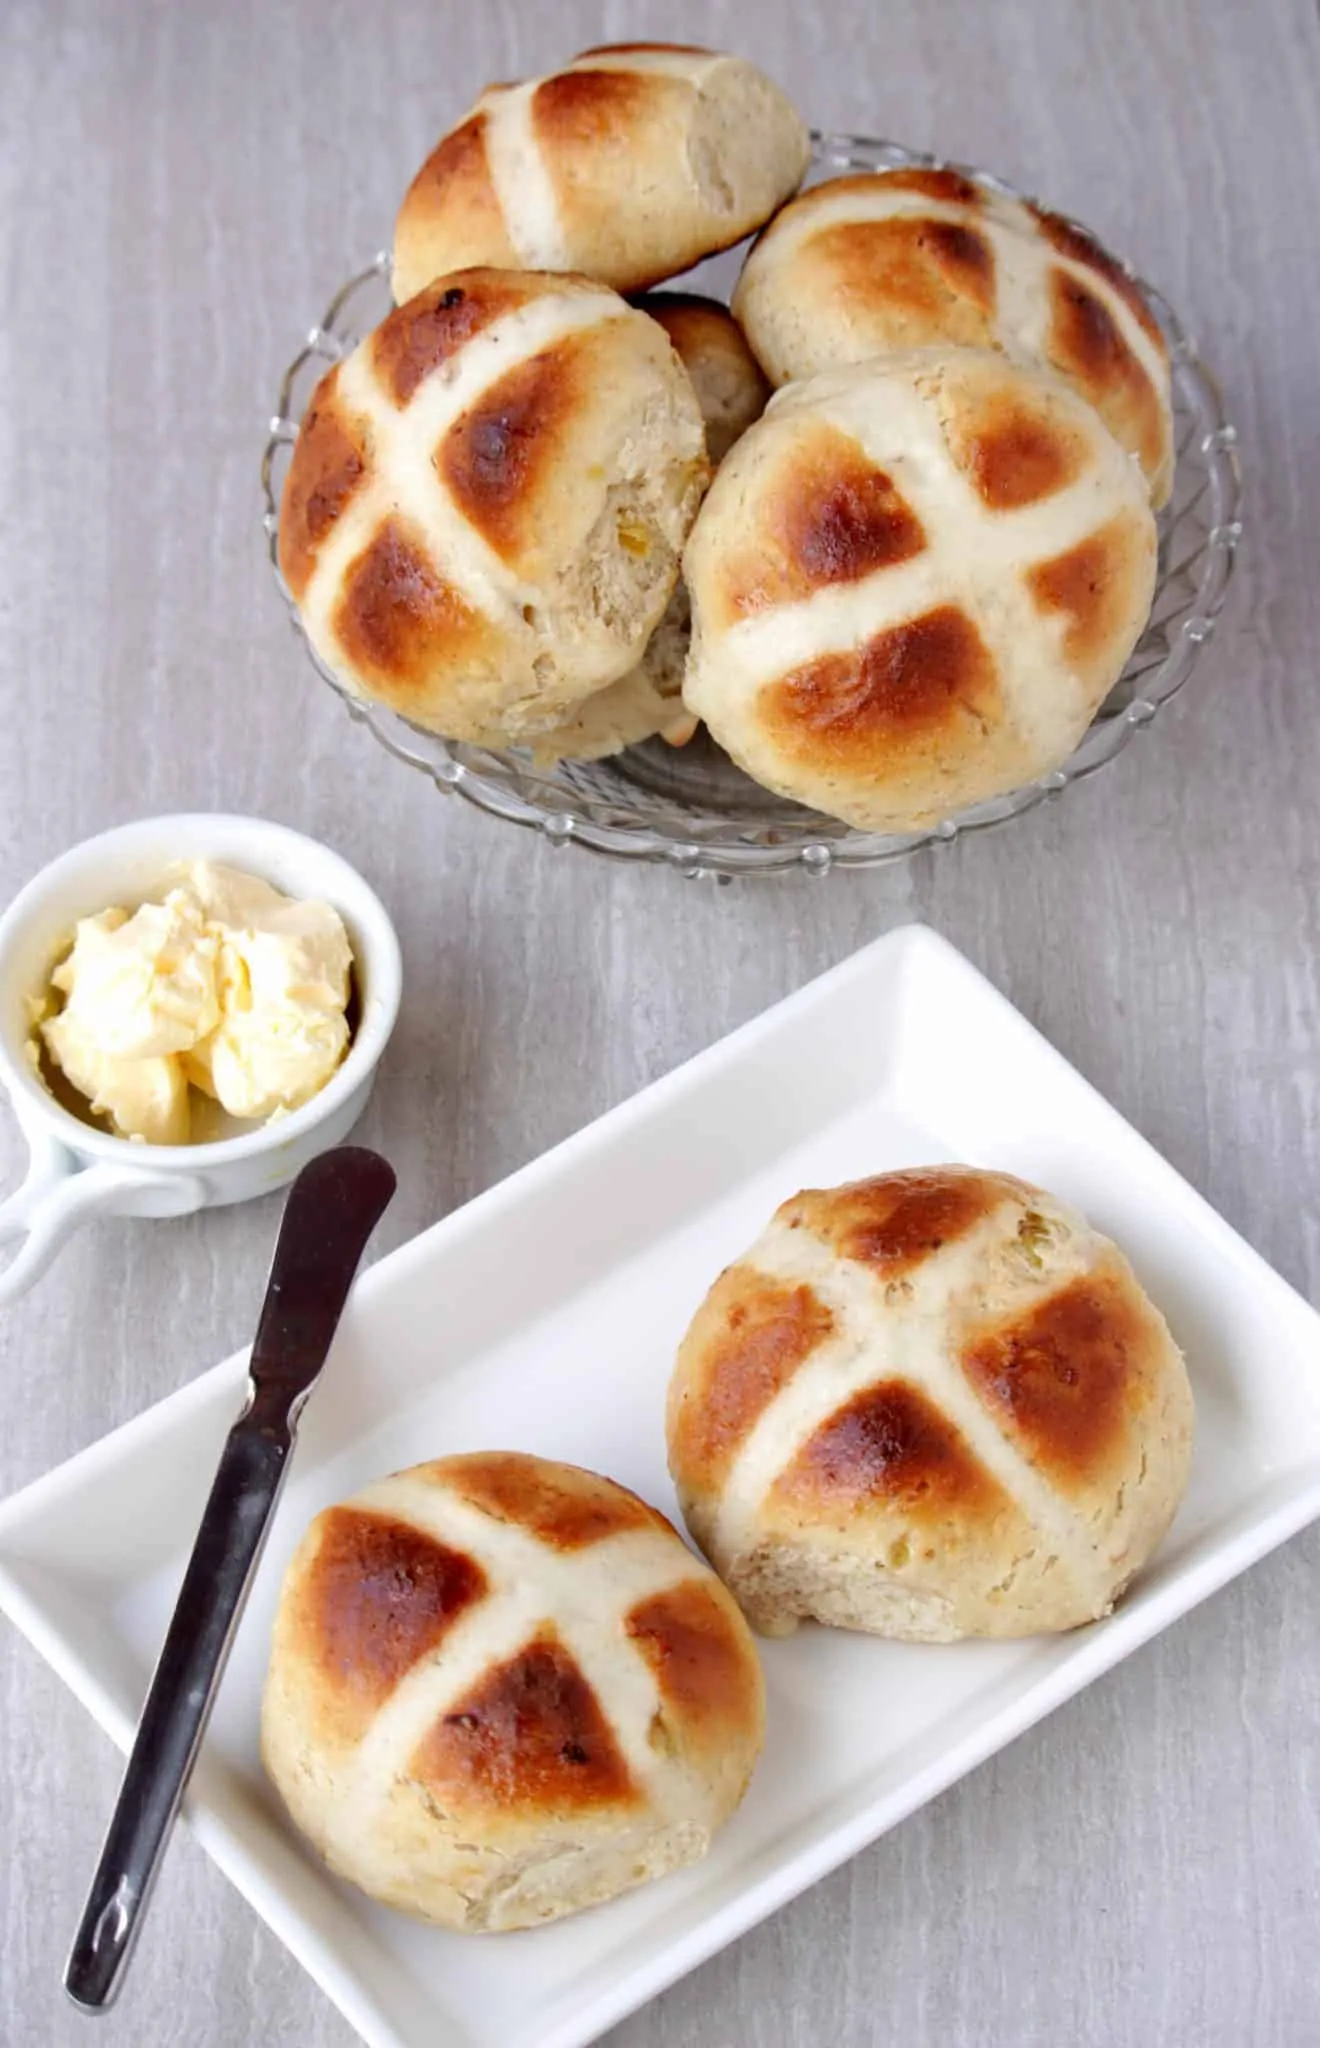 Hot Cross Buns in a white plate and glass bowl with butter on the side.